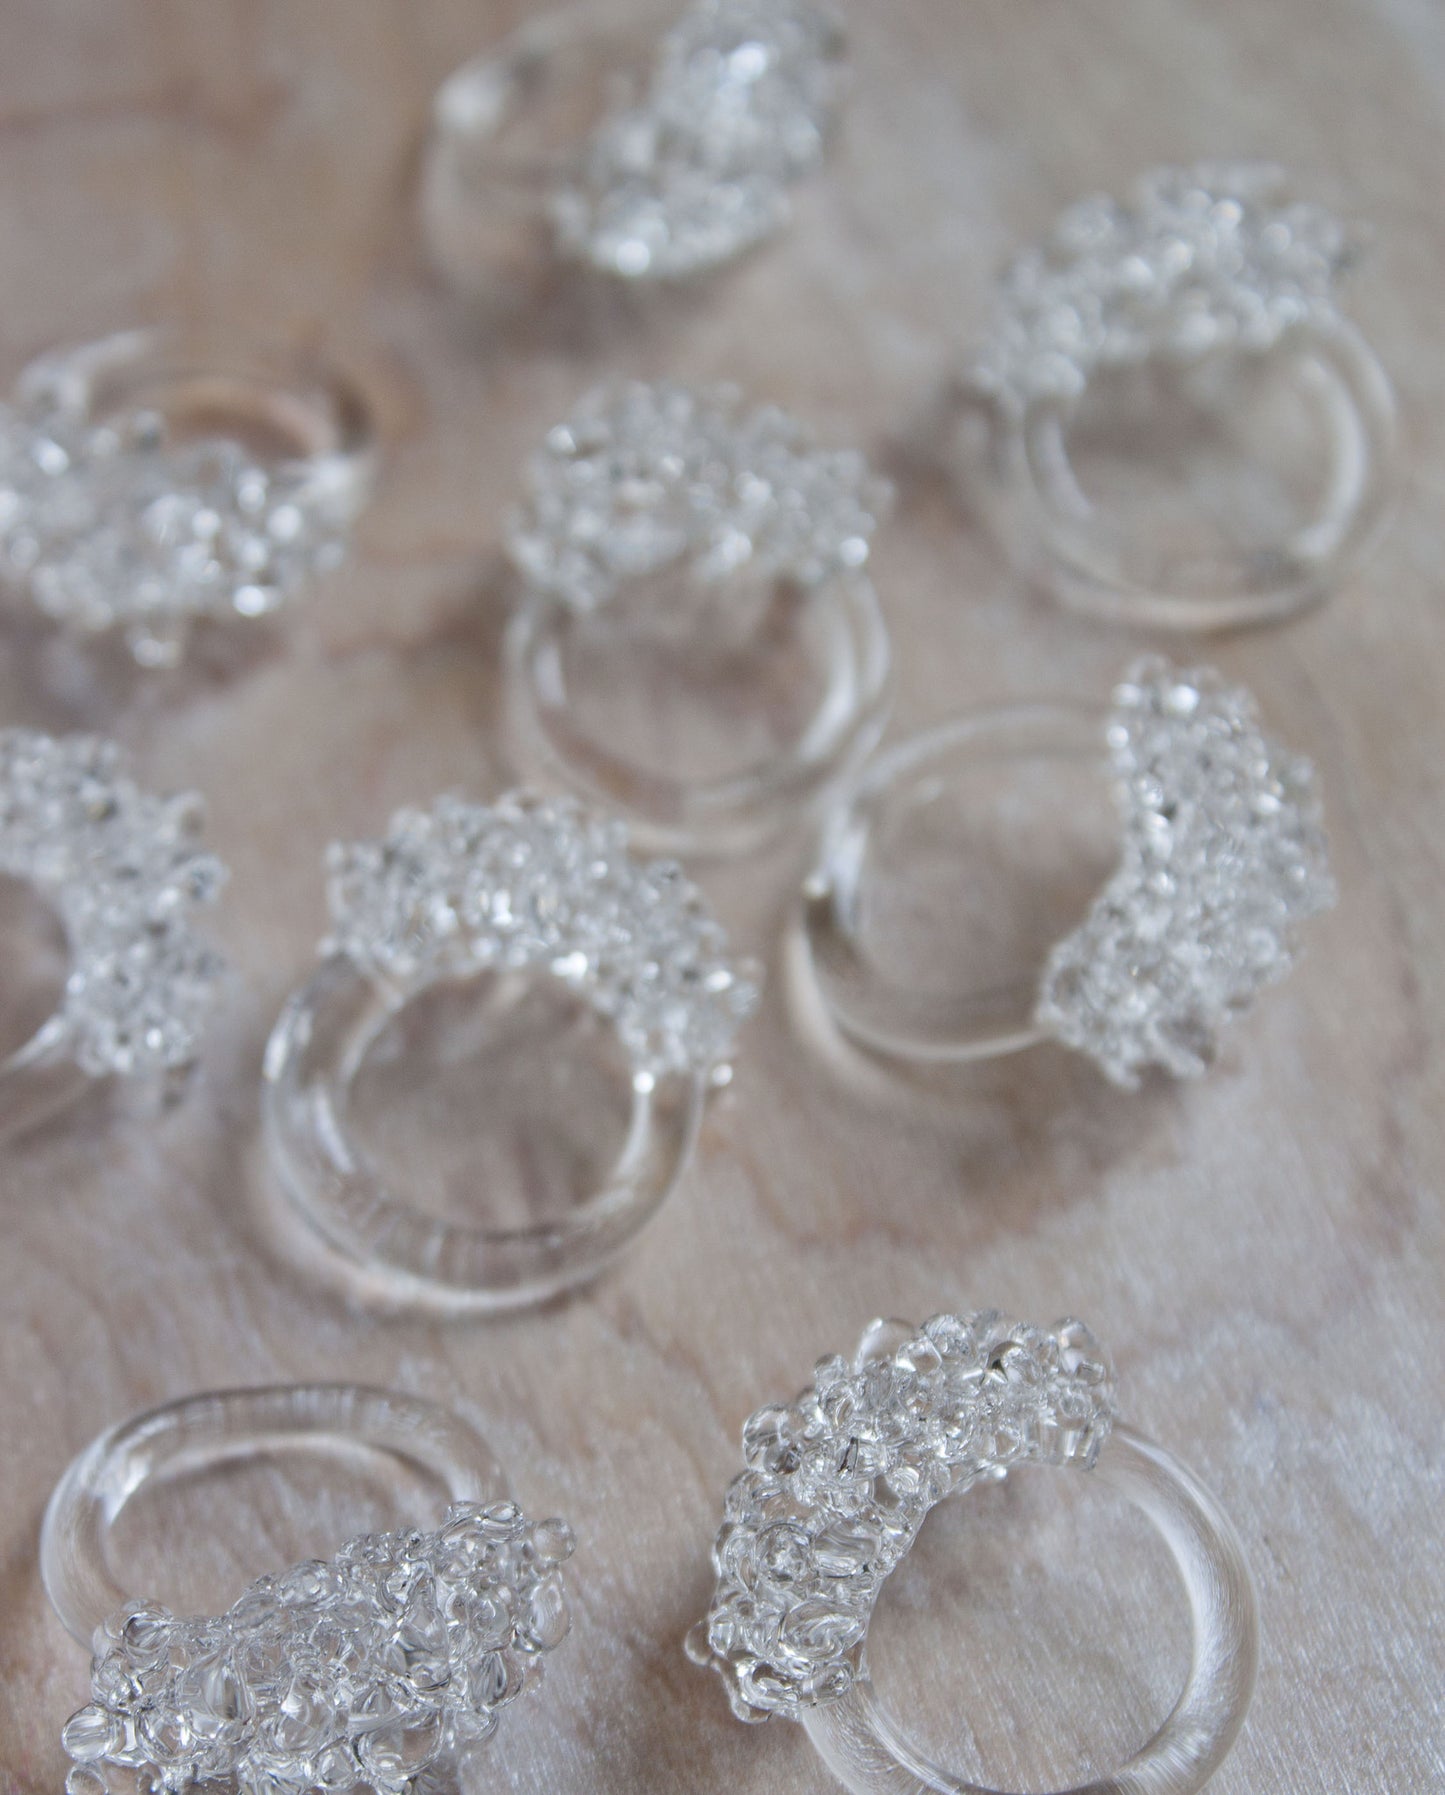 Glass Cluster Ring - Clear